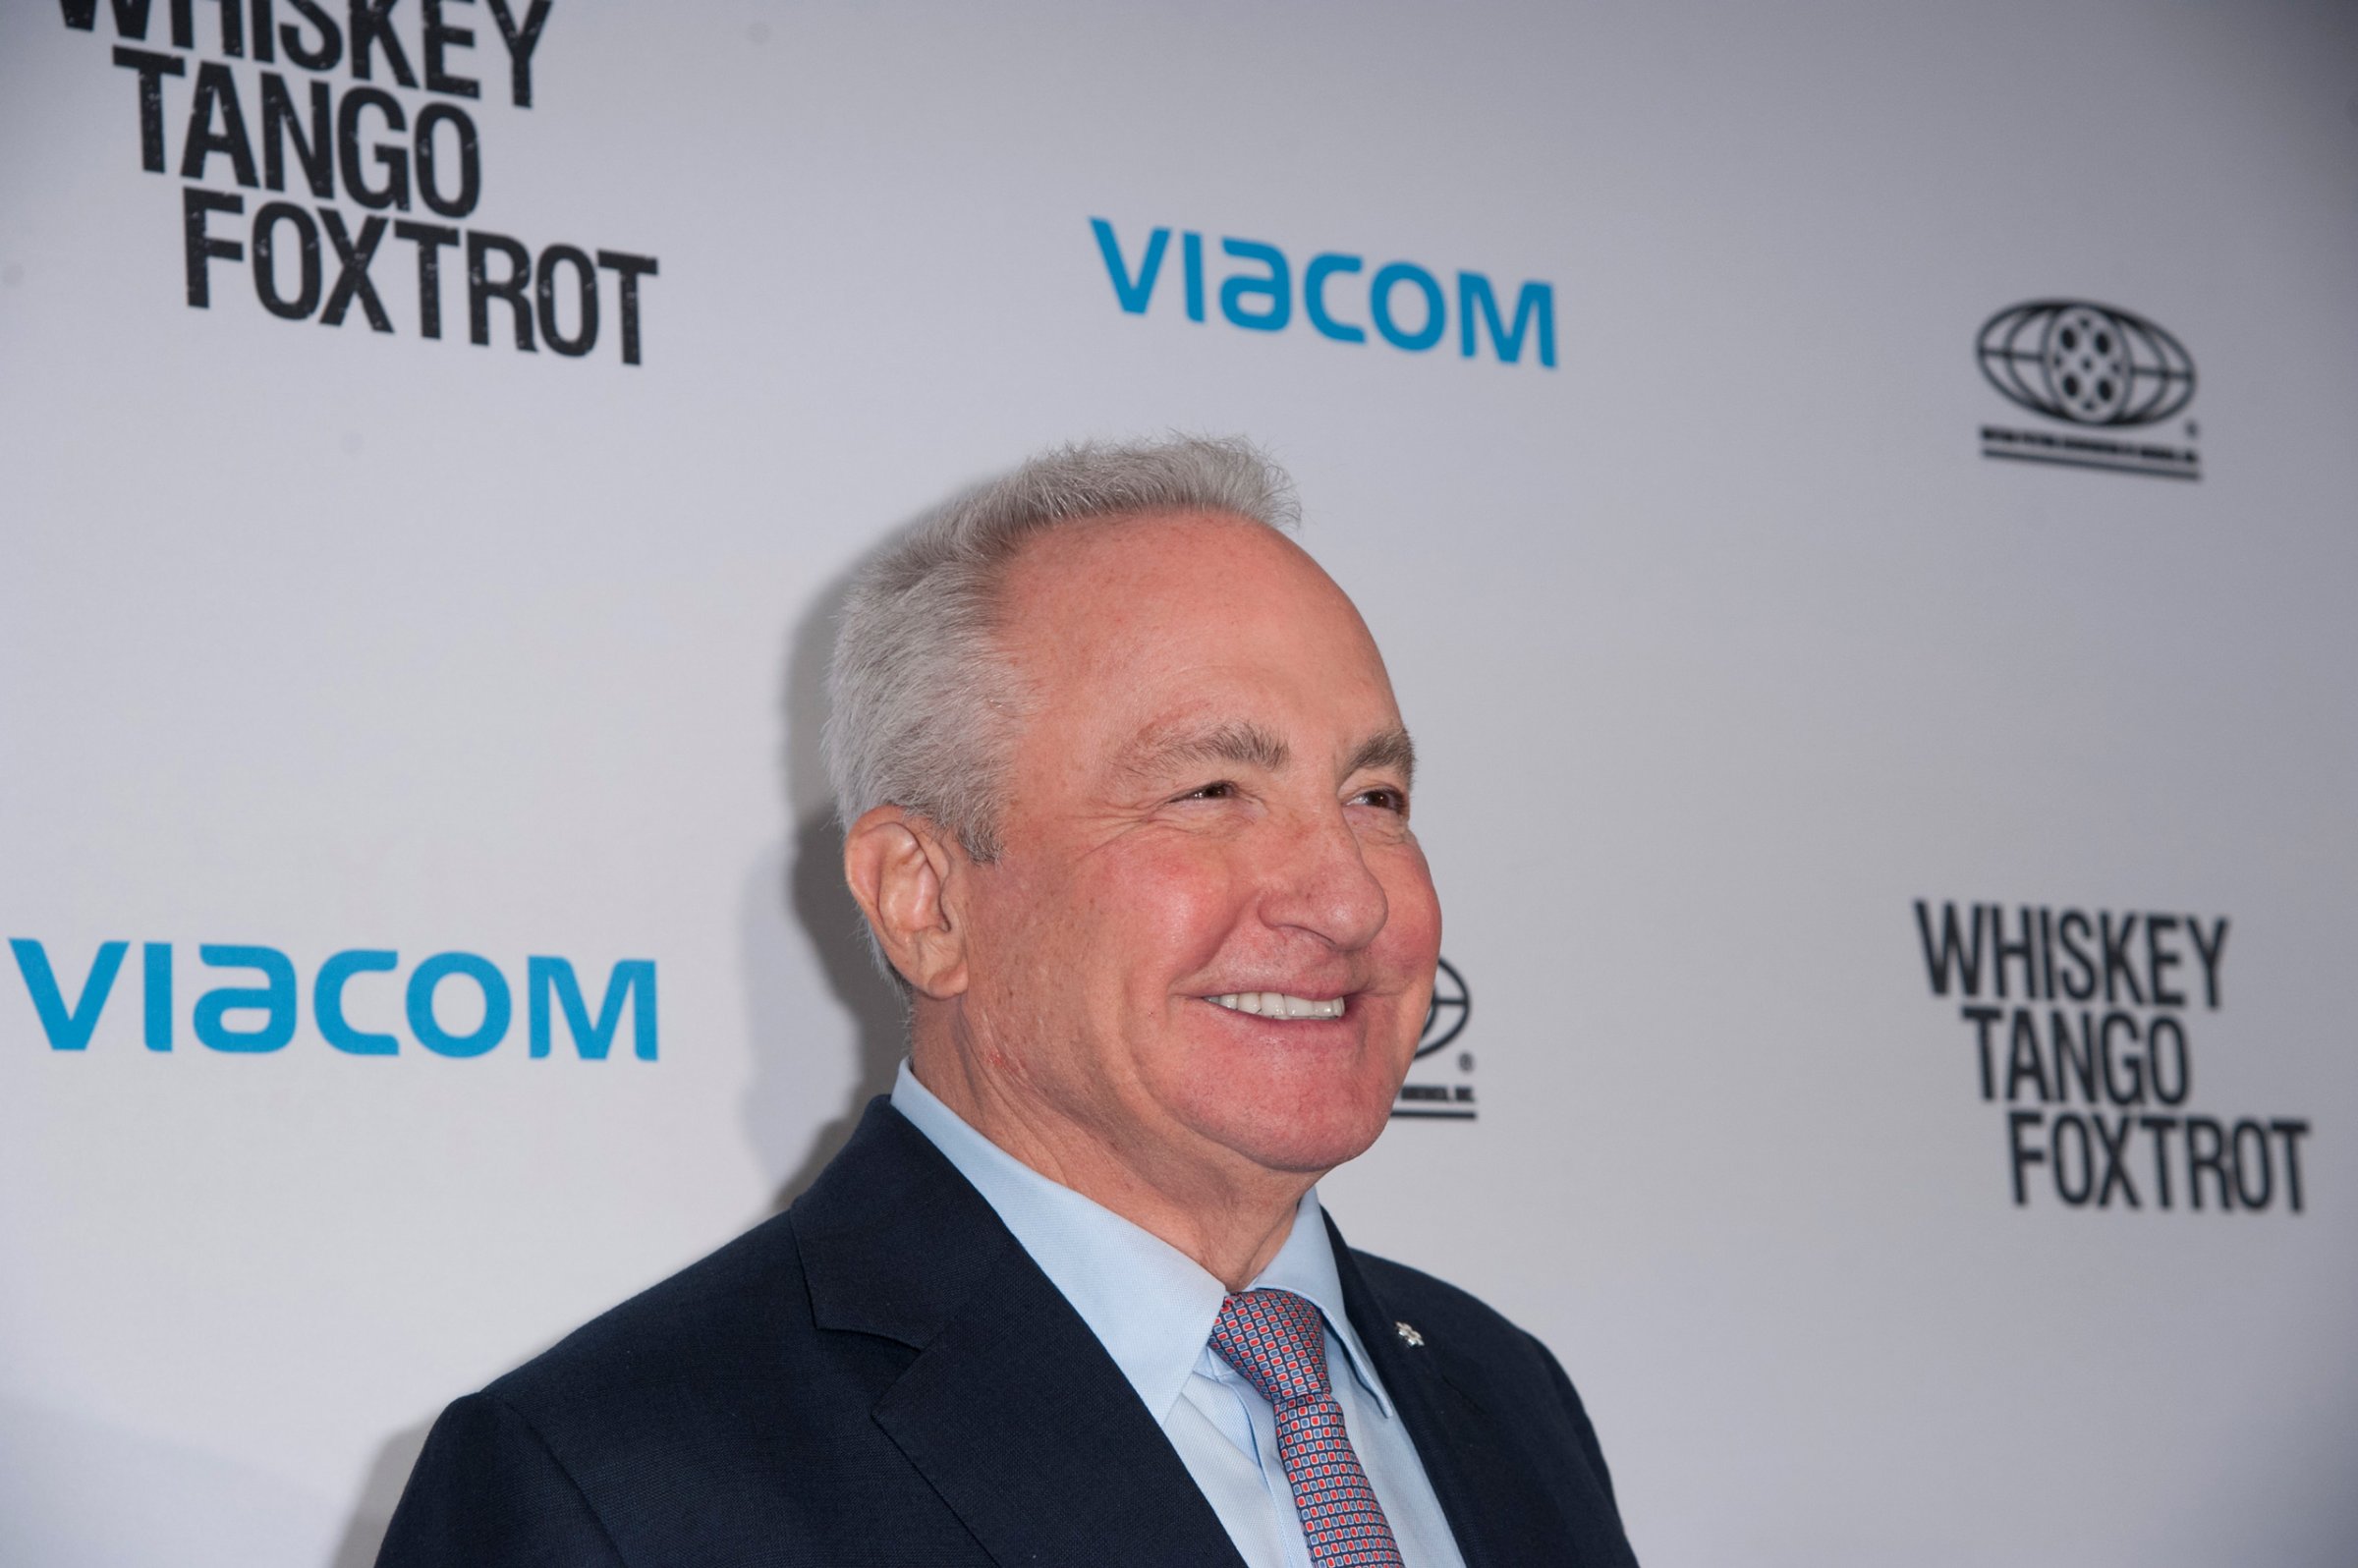 WASHINGTON, DC - FEBRUARY 23: Producer Lorne Michaels attend a special advance screening of Paramount Pictures' "Whiskey Tango Foxtrot" at Burke Theater hosted by Paramount Pictures and The Motion Picture Association of America on February 23, 2016 in Washington, DC. Photo by Kris Connor) *** Please Use Credit from Credit Field ***